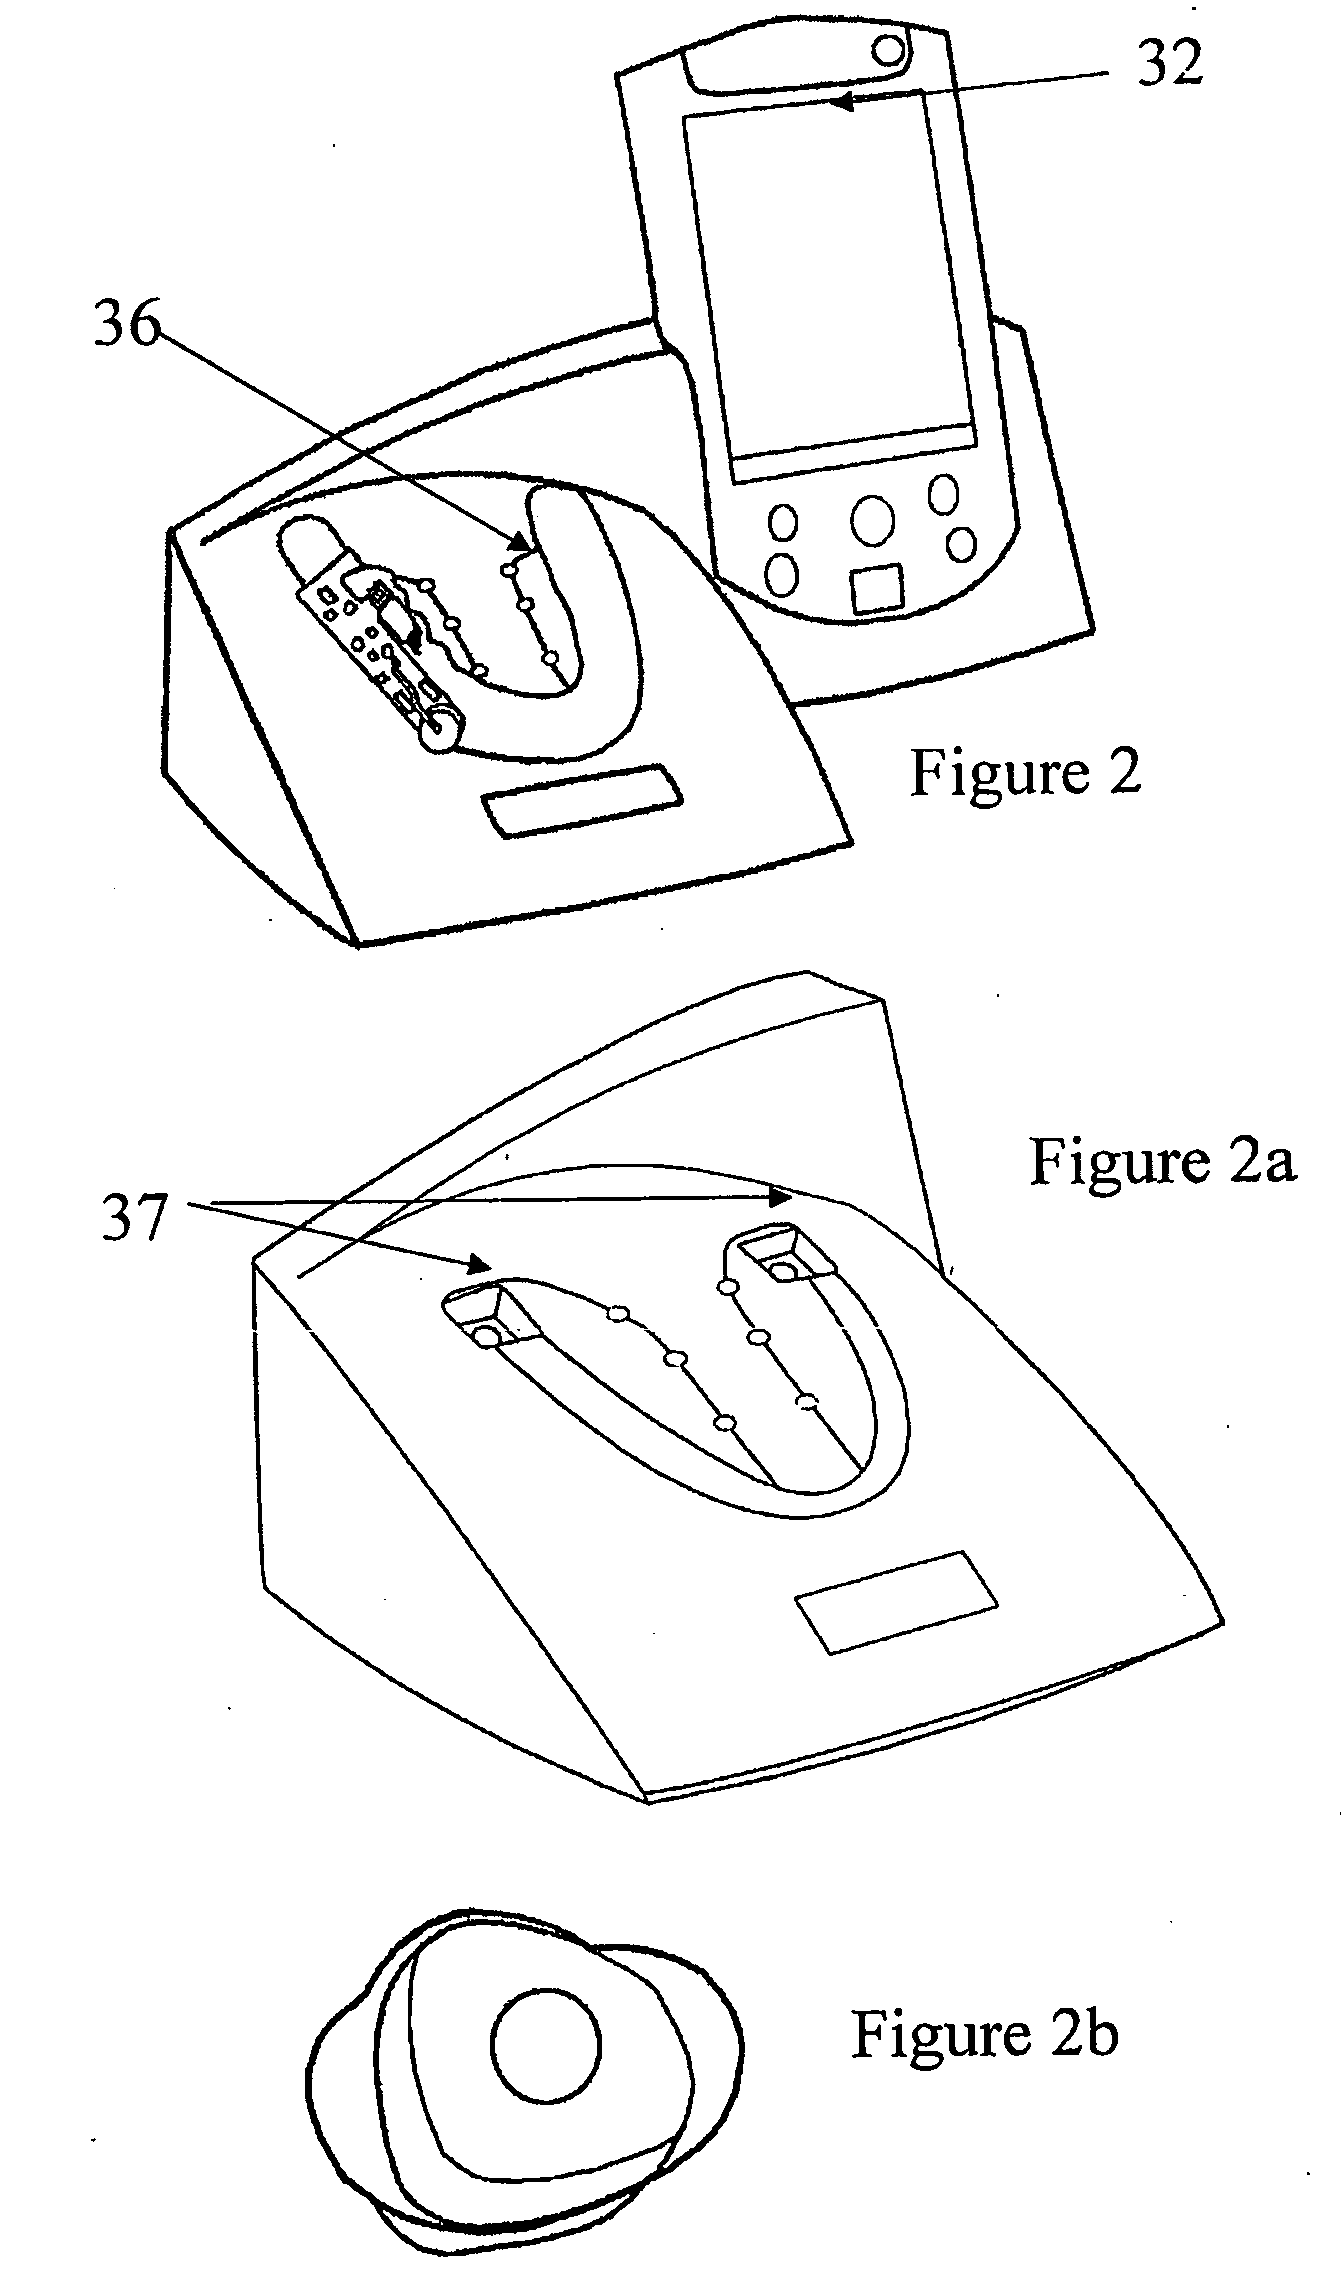 Manufacturing methods, testing methods, and testers for intra-oral electronically embedded devices